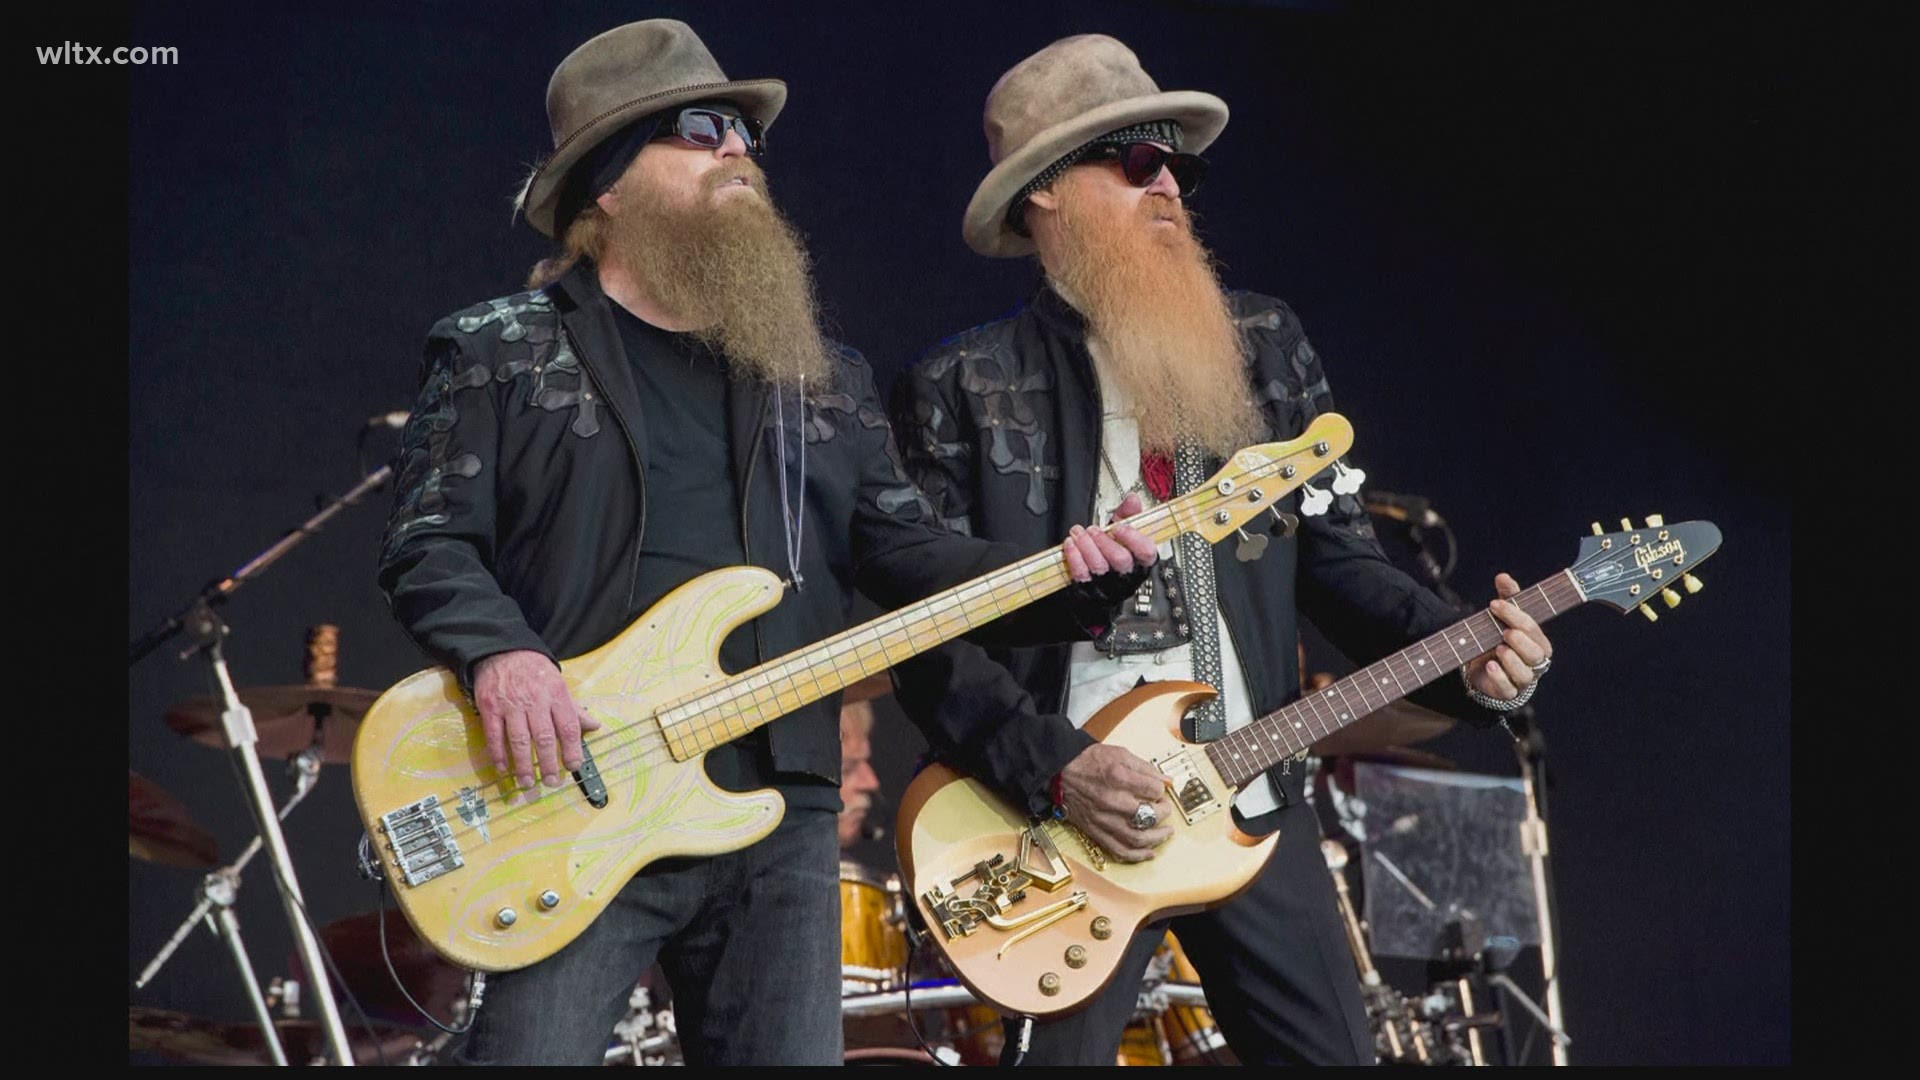 ZZ Top's Dusty Hill passed away at his home in Houston, according to the band's Facebook page.